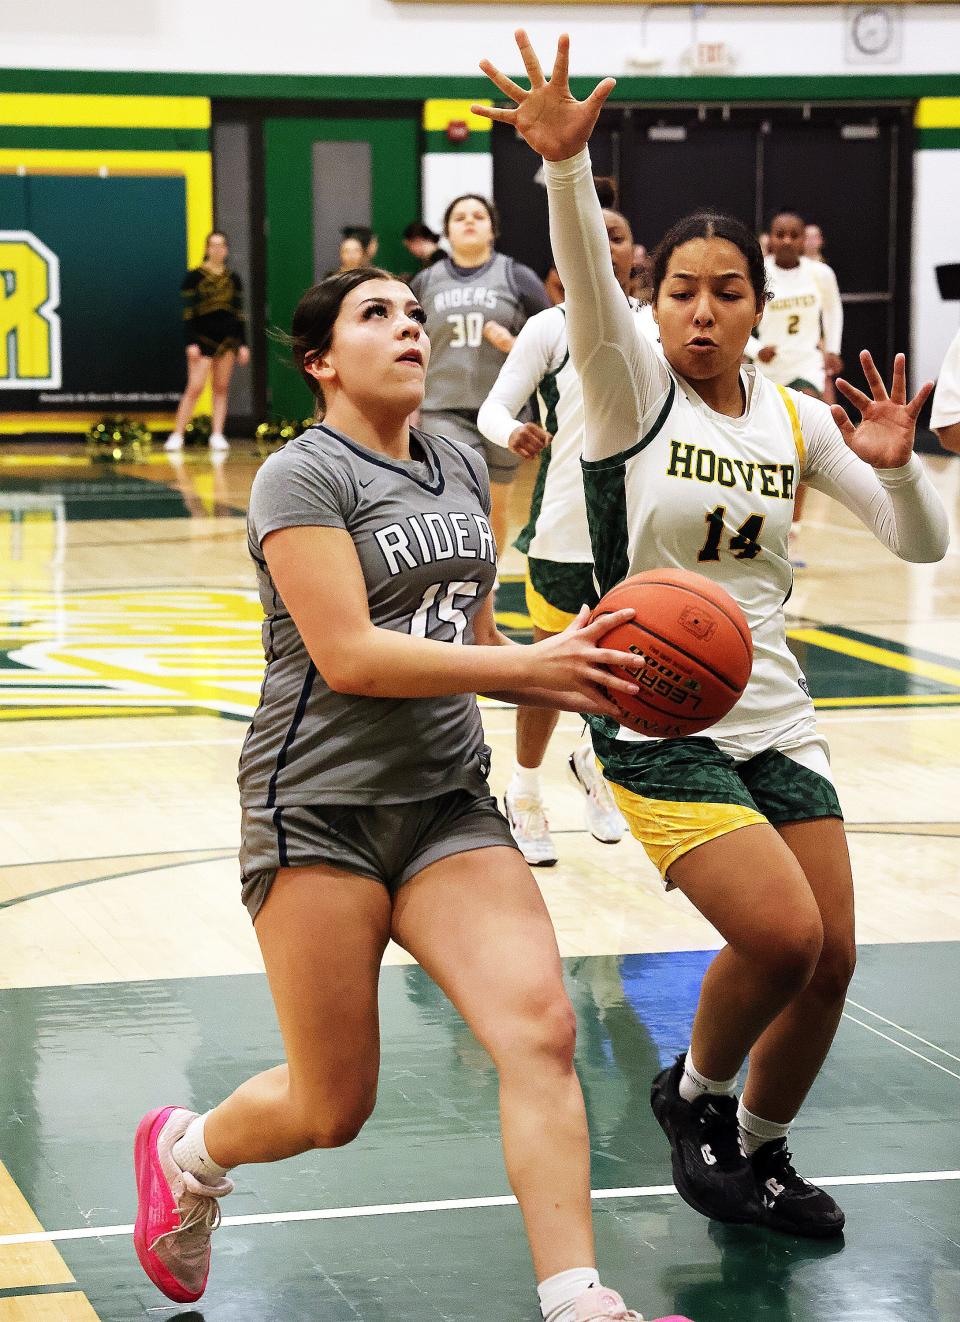 Roosevelt freshman Tess Ryan (15) drives the lane against Hoover senior guard Alayna Jarrett (14) on Friday. Roosevelt is above .500 on the season with Friday's win.